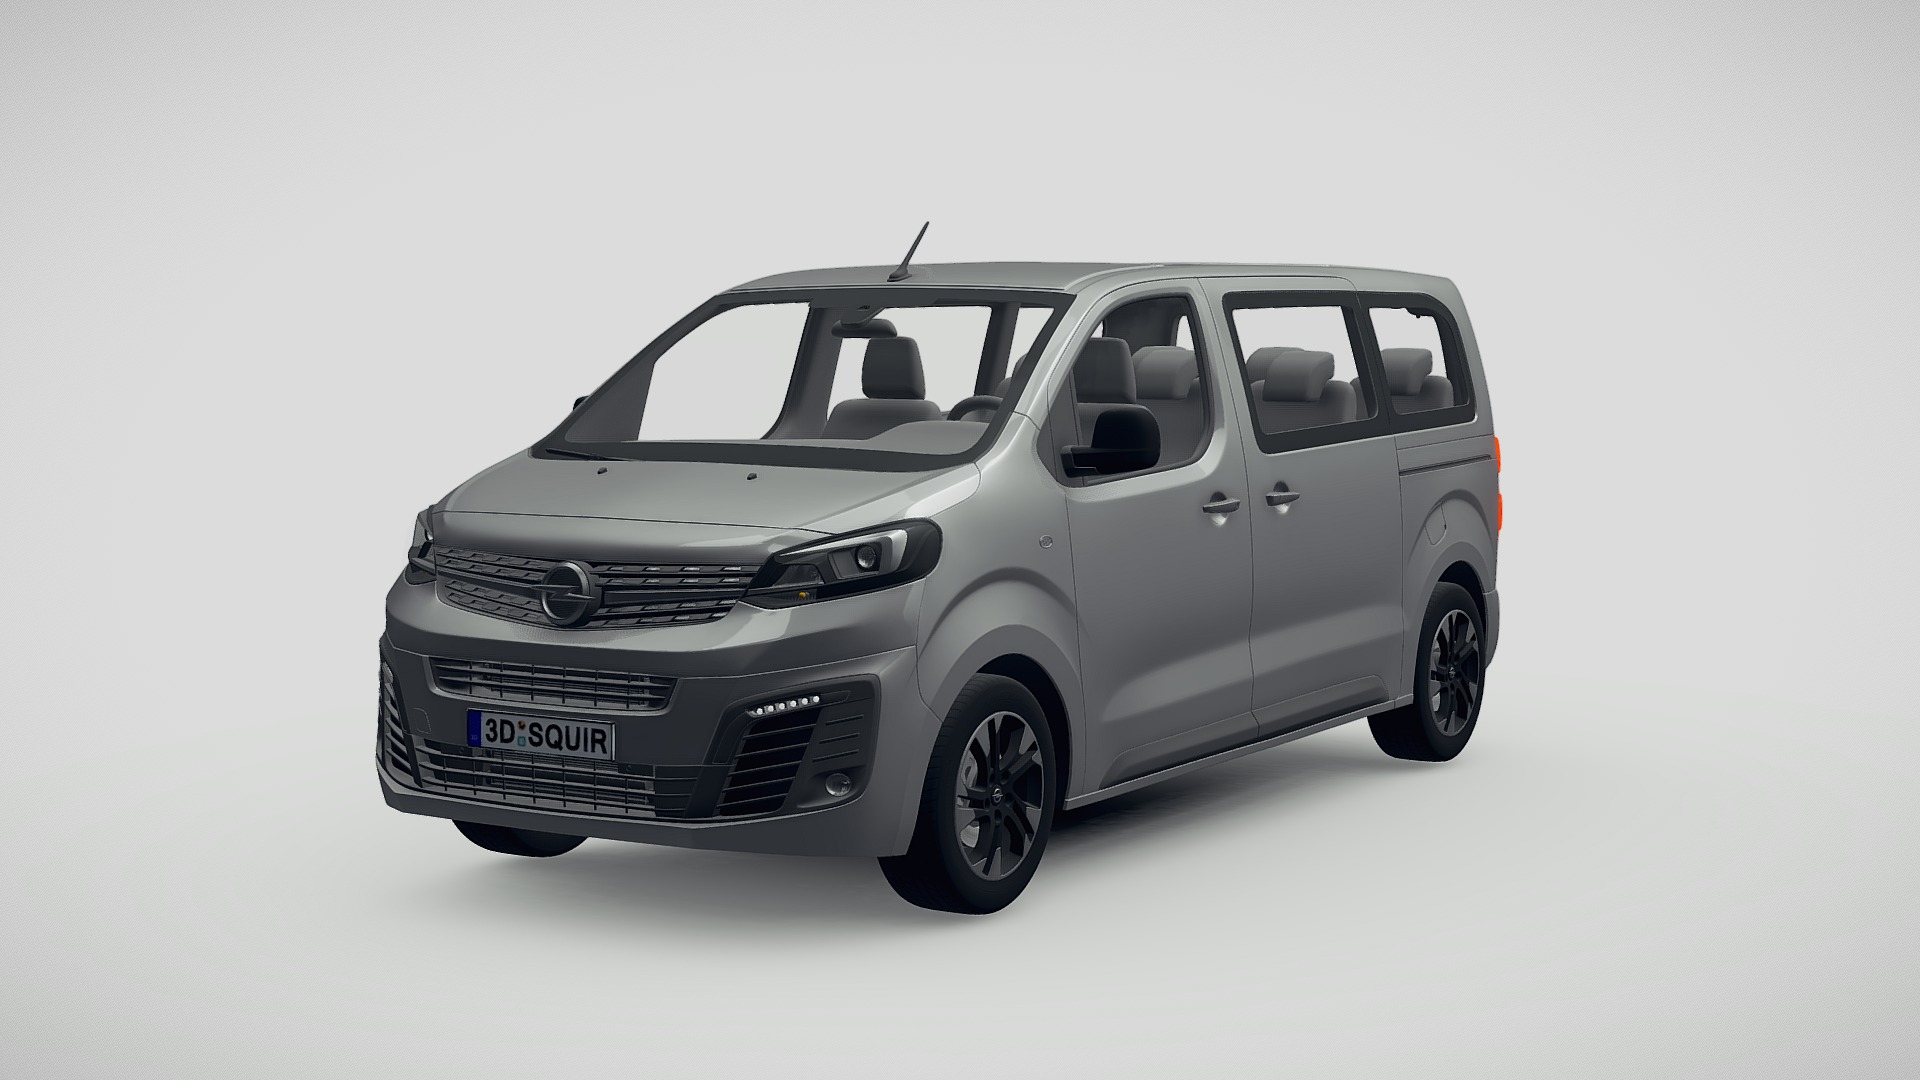 3D model Opel Zafira Life 2020 - This is a 3D model of the Opel Zafira Life 2020. The 3D model is about a silver car with a black roof.